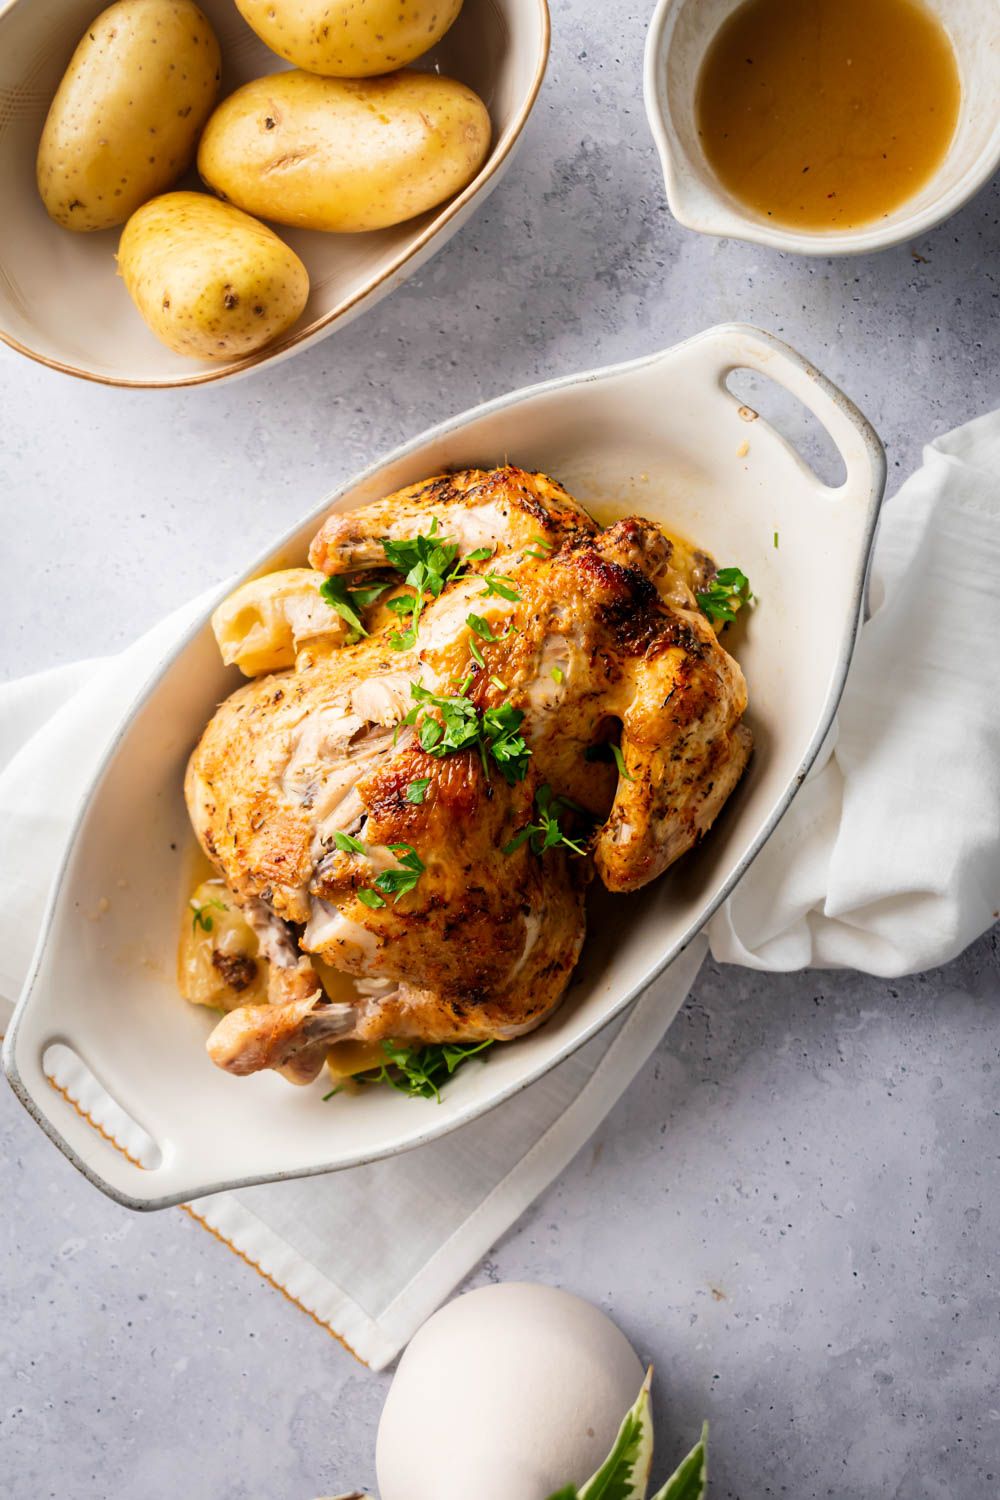 Rotisserie chicken with potatoes served in a white dish with lemon, garlic, and parsley.